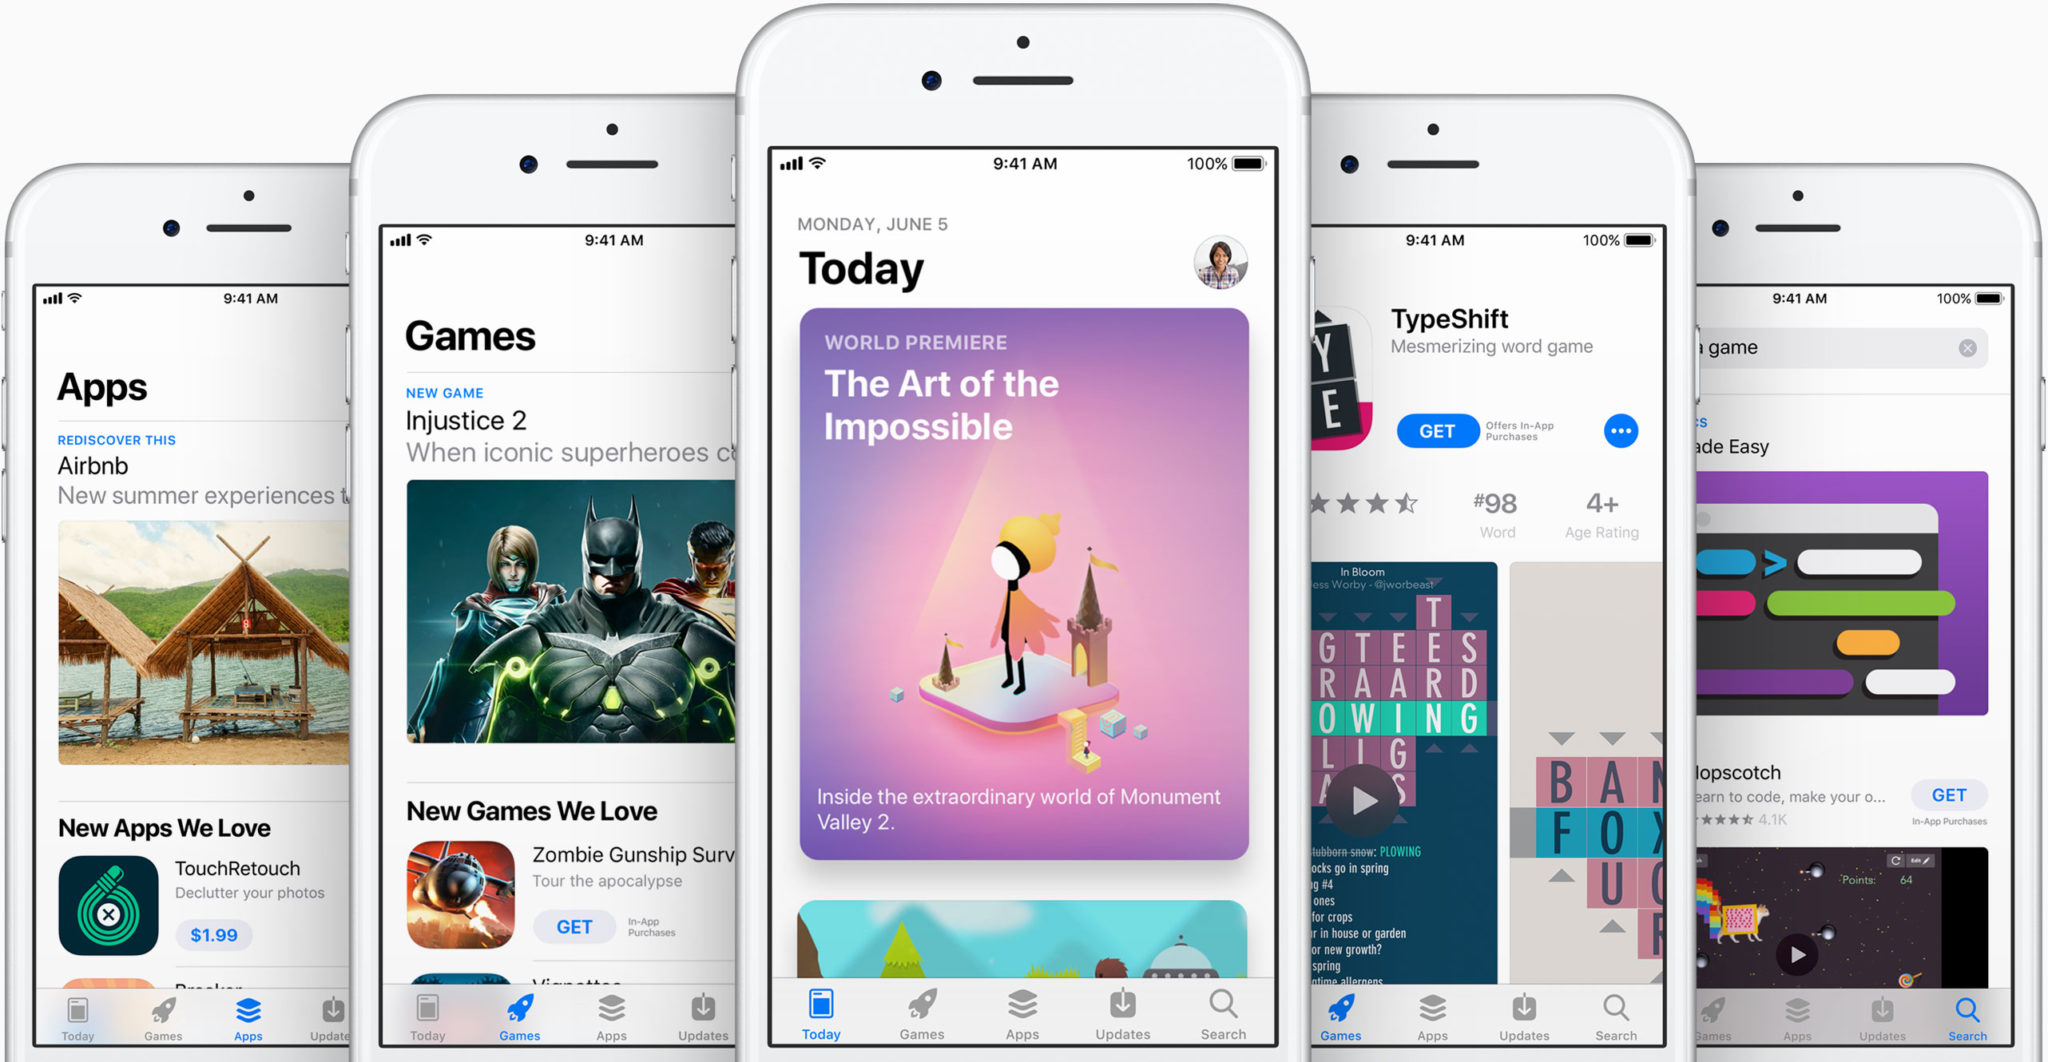 app store redesign on iPhone ios 11